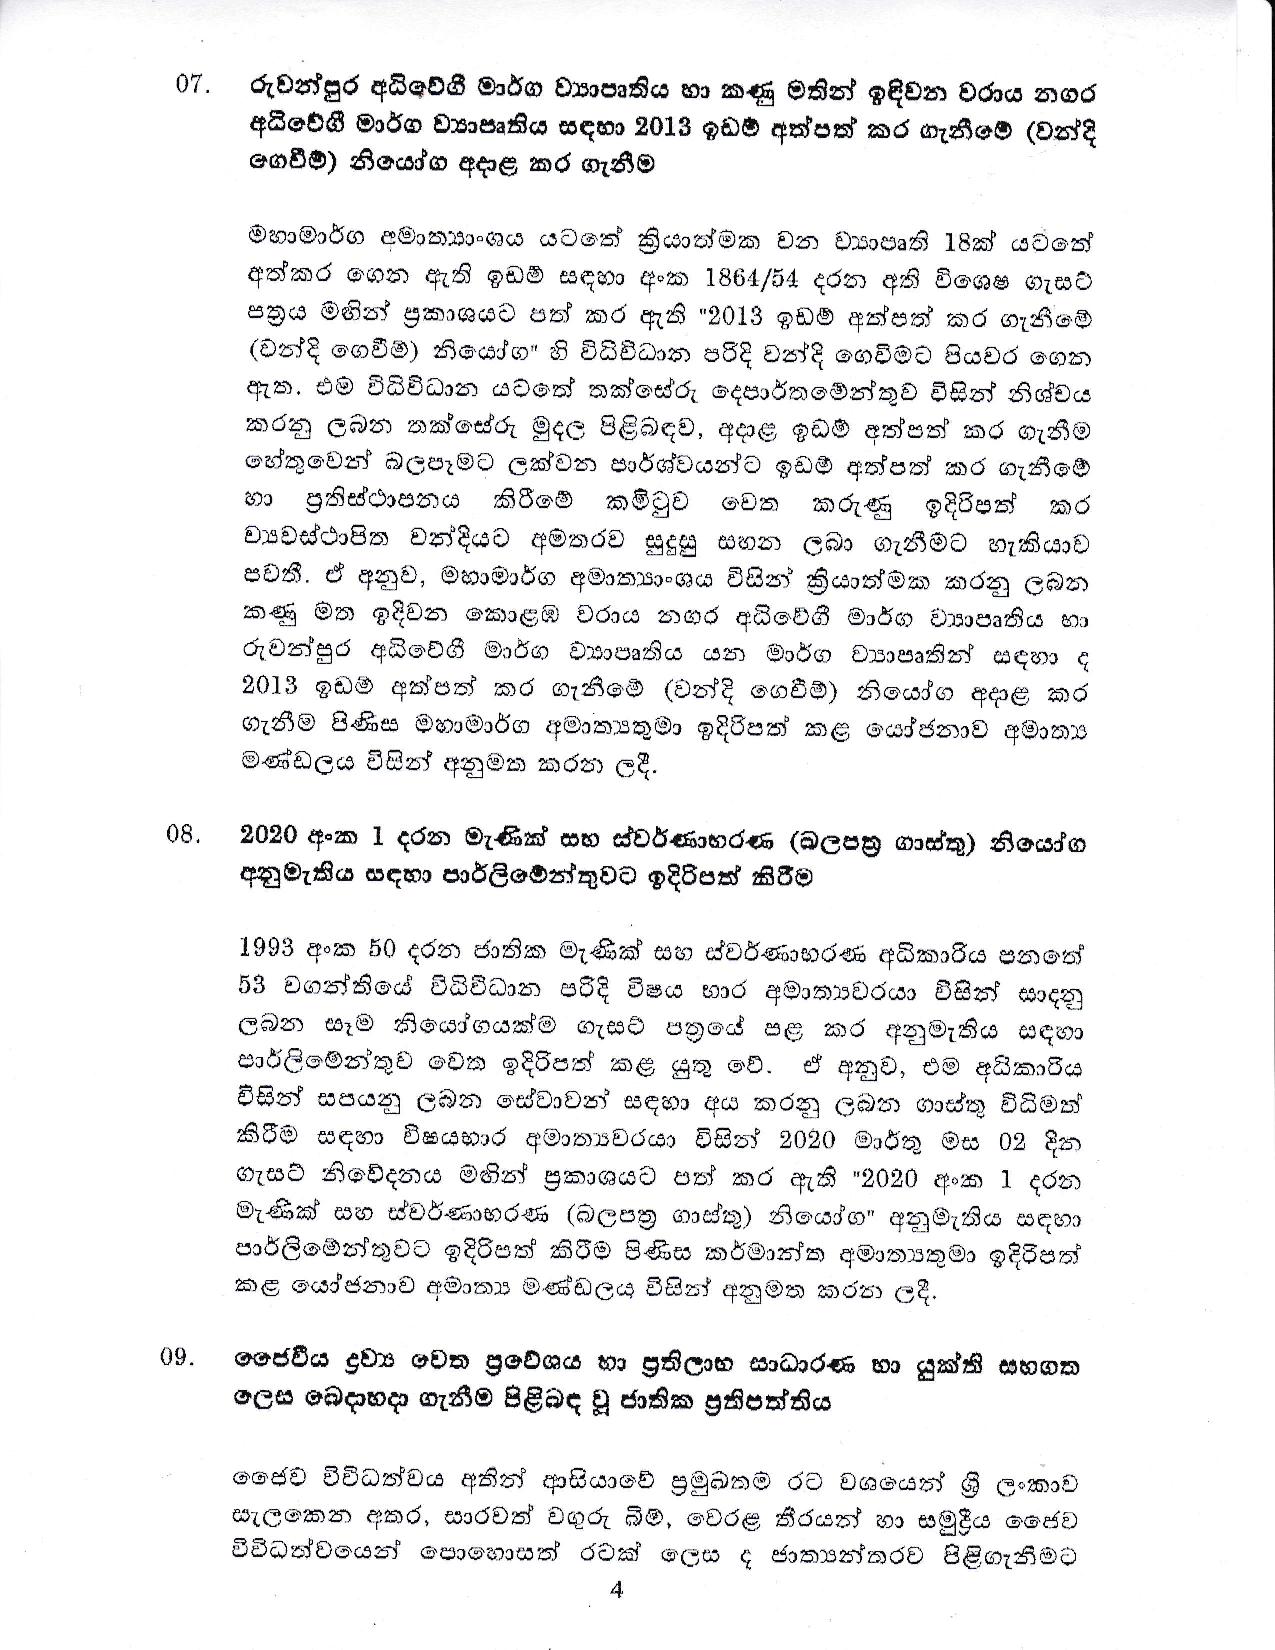 Cabinet Decision on 14.12.2020 page 004